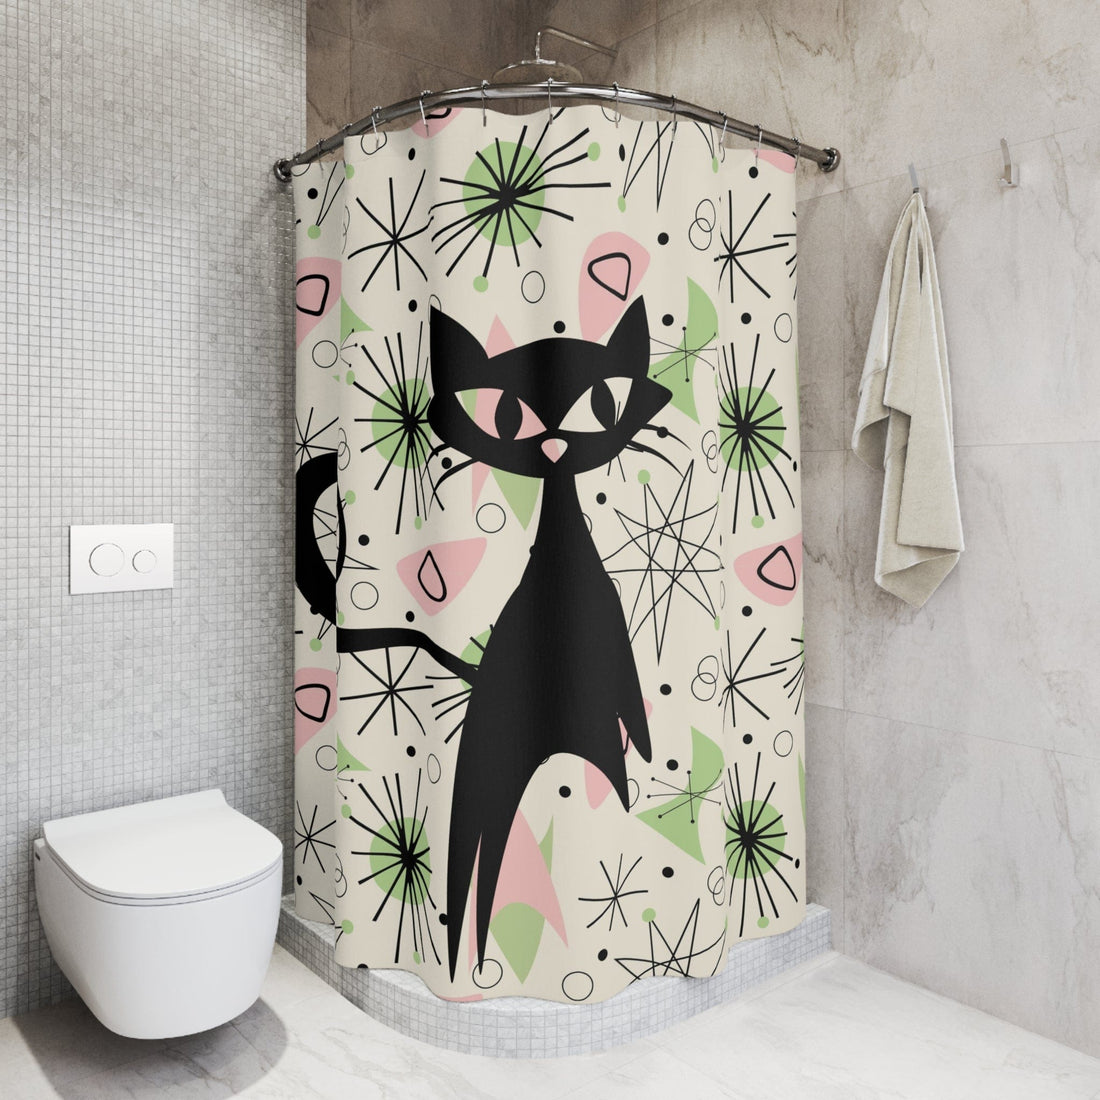 Atomic Cat, Sky Rocket Space Cat, Up Up And Away, Atomic Starburst, Mid Century Modern Shower Curtain Home Decor 71&quot; × 74&quot;